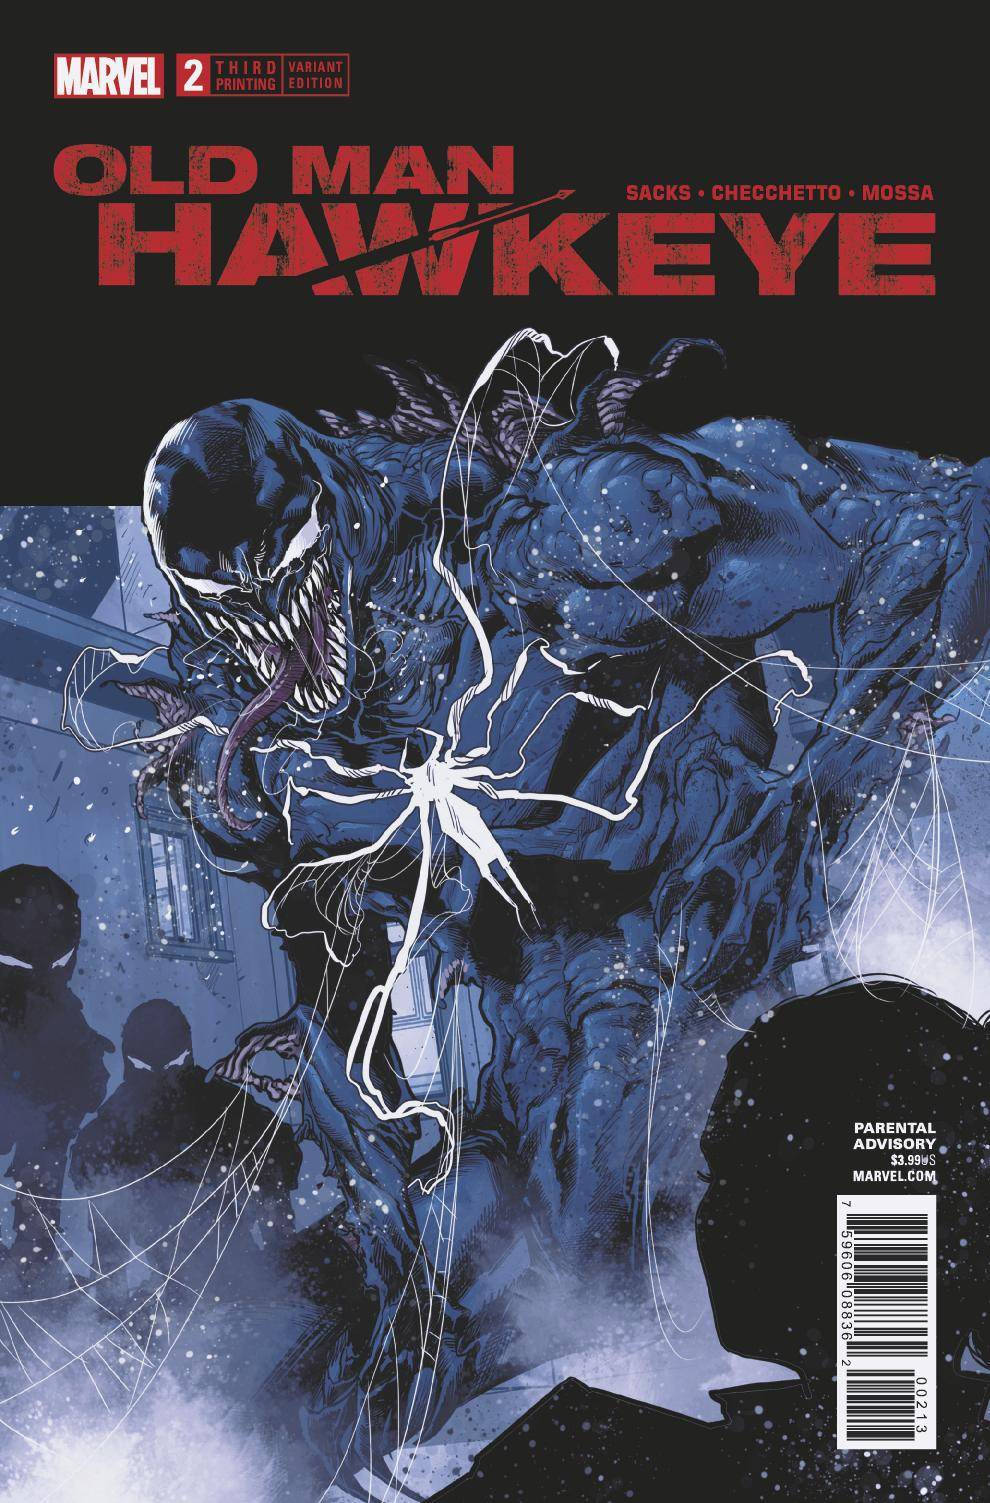 Old Man Hawkeye #2 (Of 12) 3rd Printing Checchetto Variant